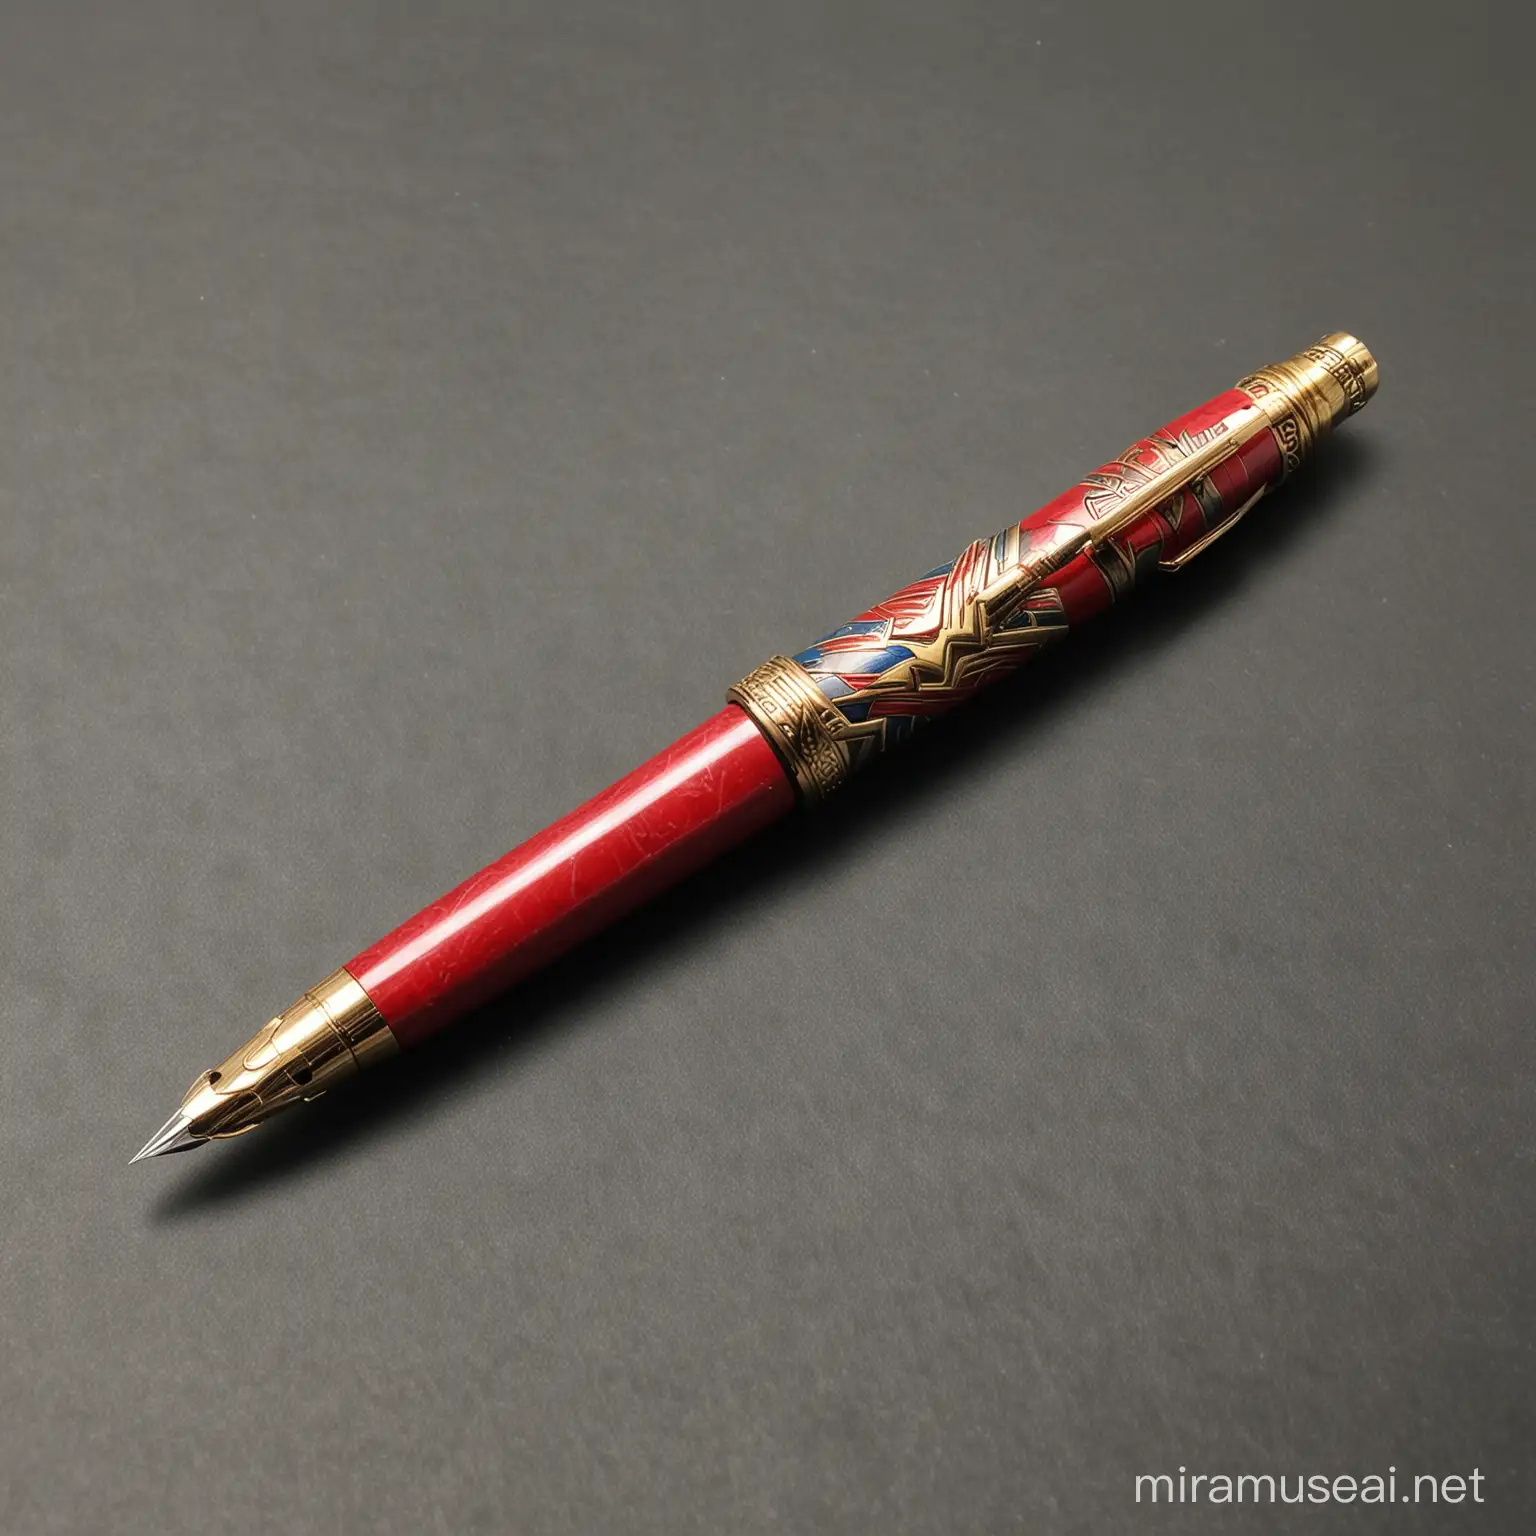 Elegant Fountain Pen Inspired by Wonder Womans Iconic Style